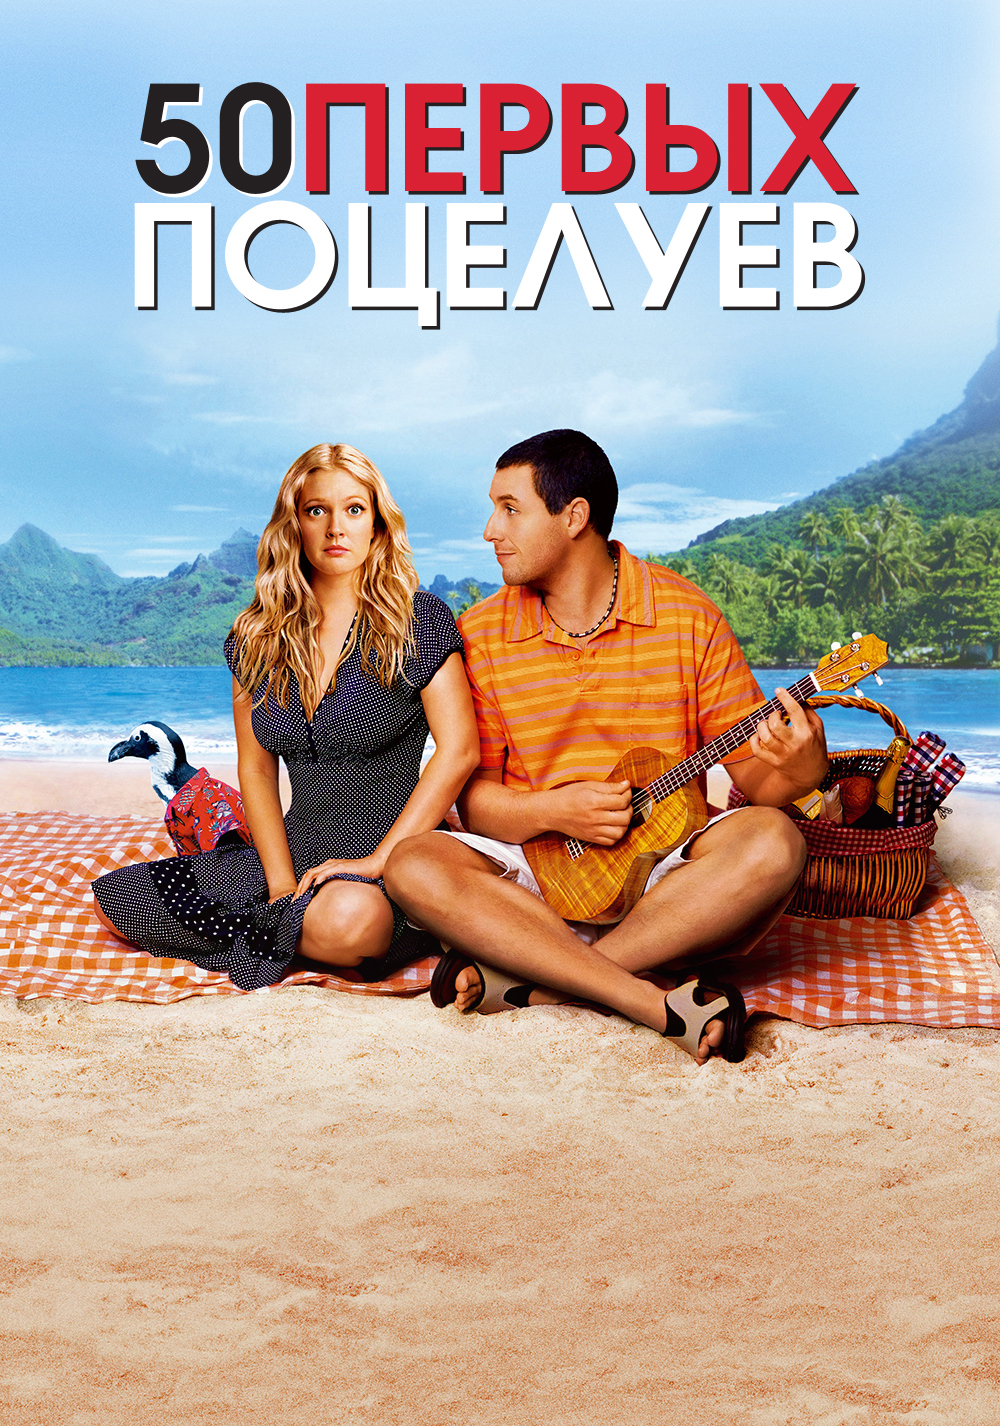 View, Download, Rate, and Comment on this 50 First Dates Movie Poster.